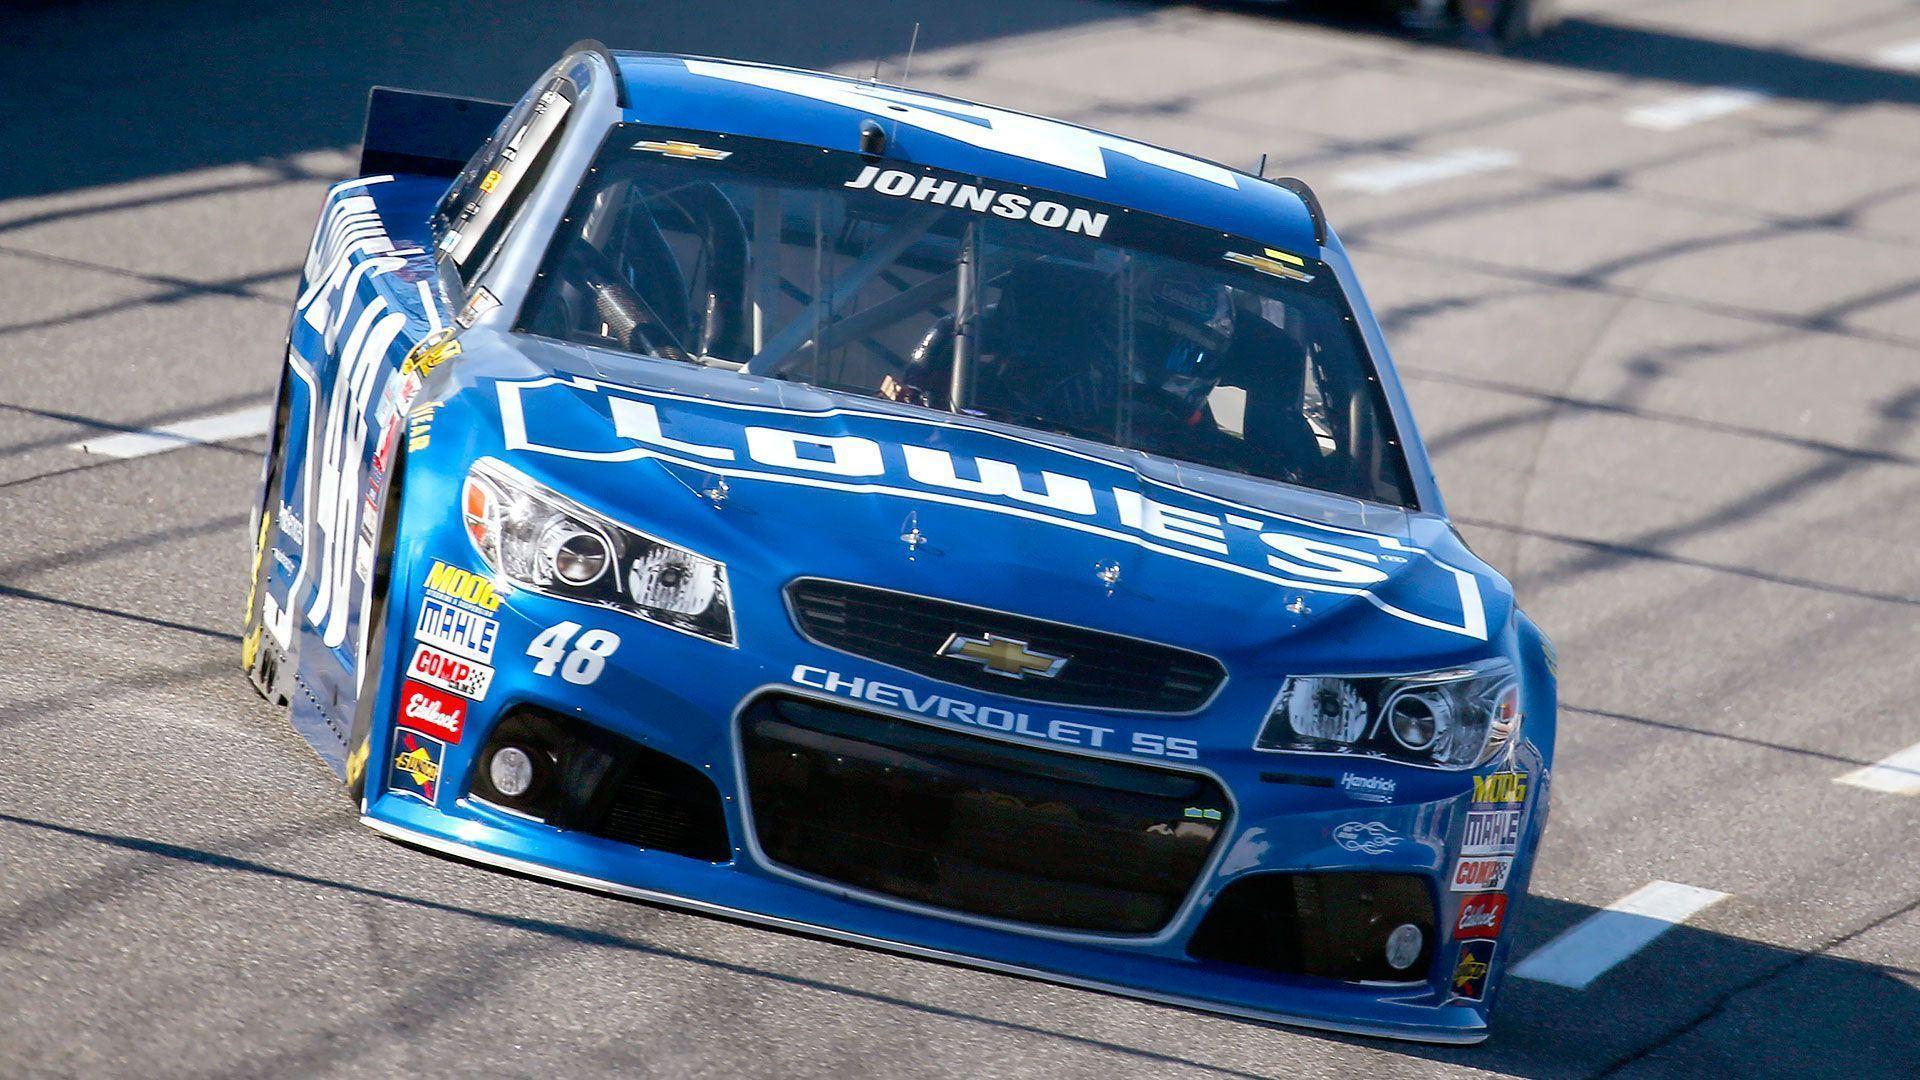 Duck Commander 500 results: Jimmie Johnson wins again at Texas